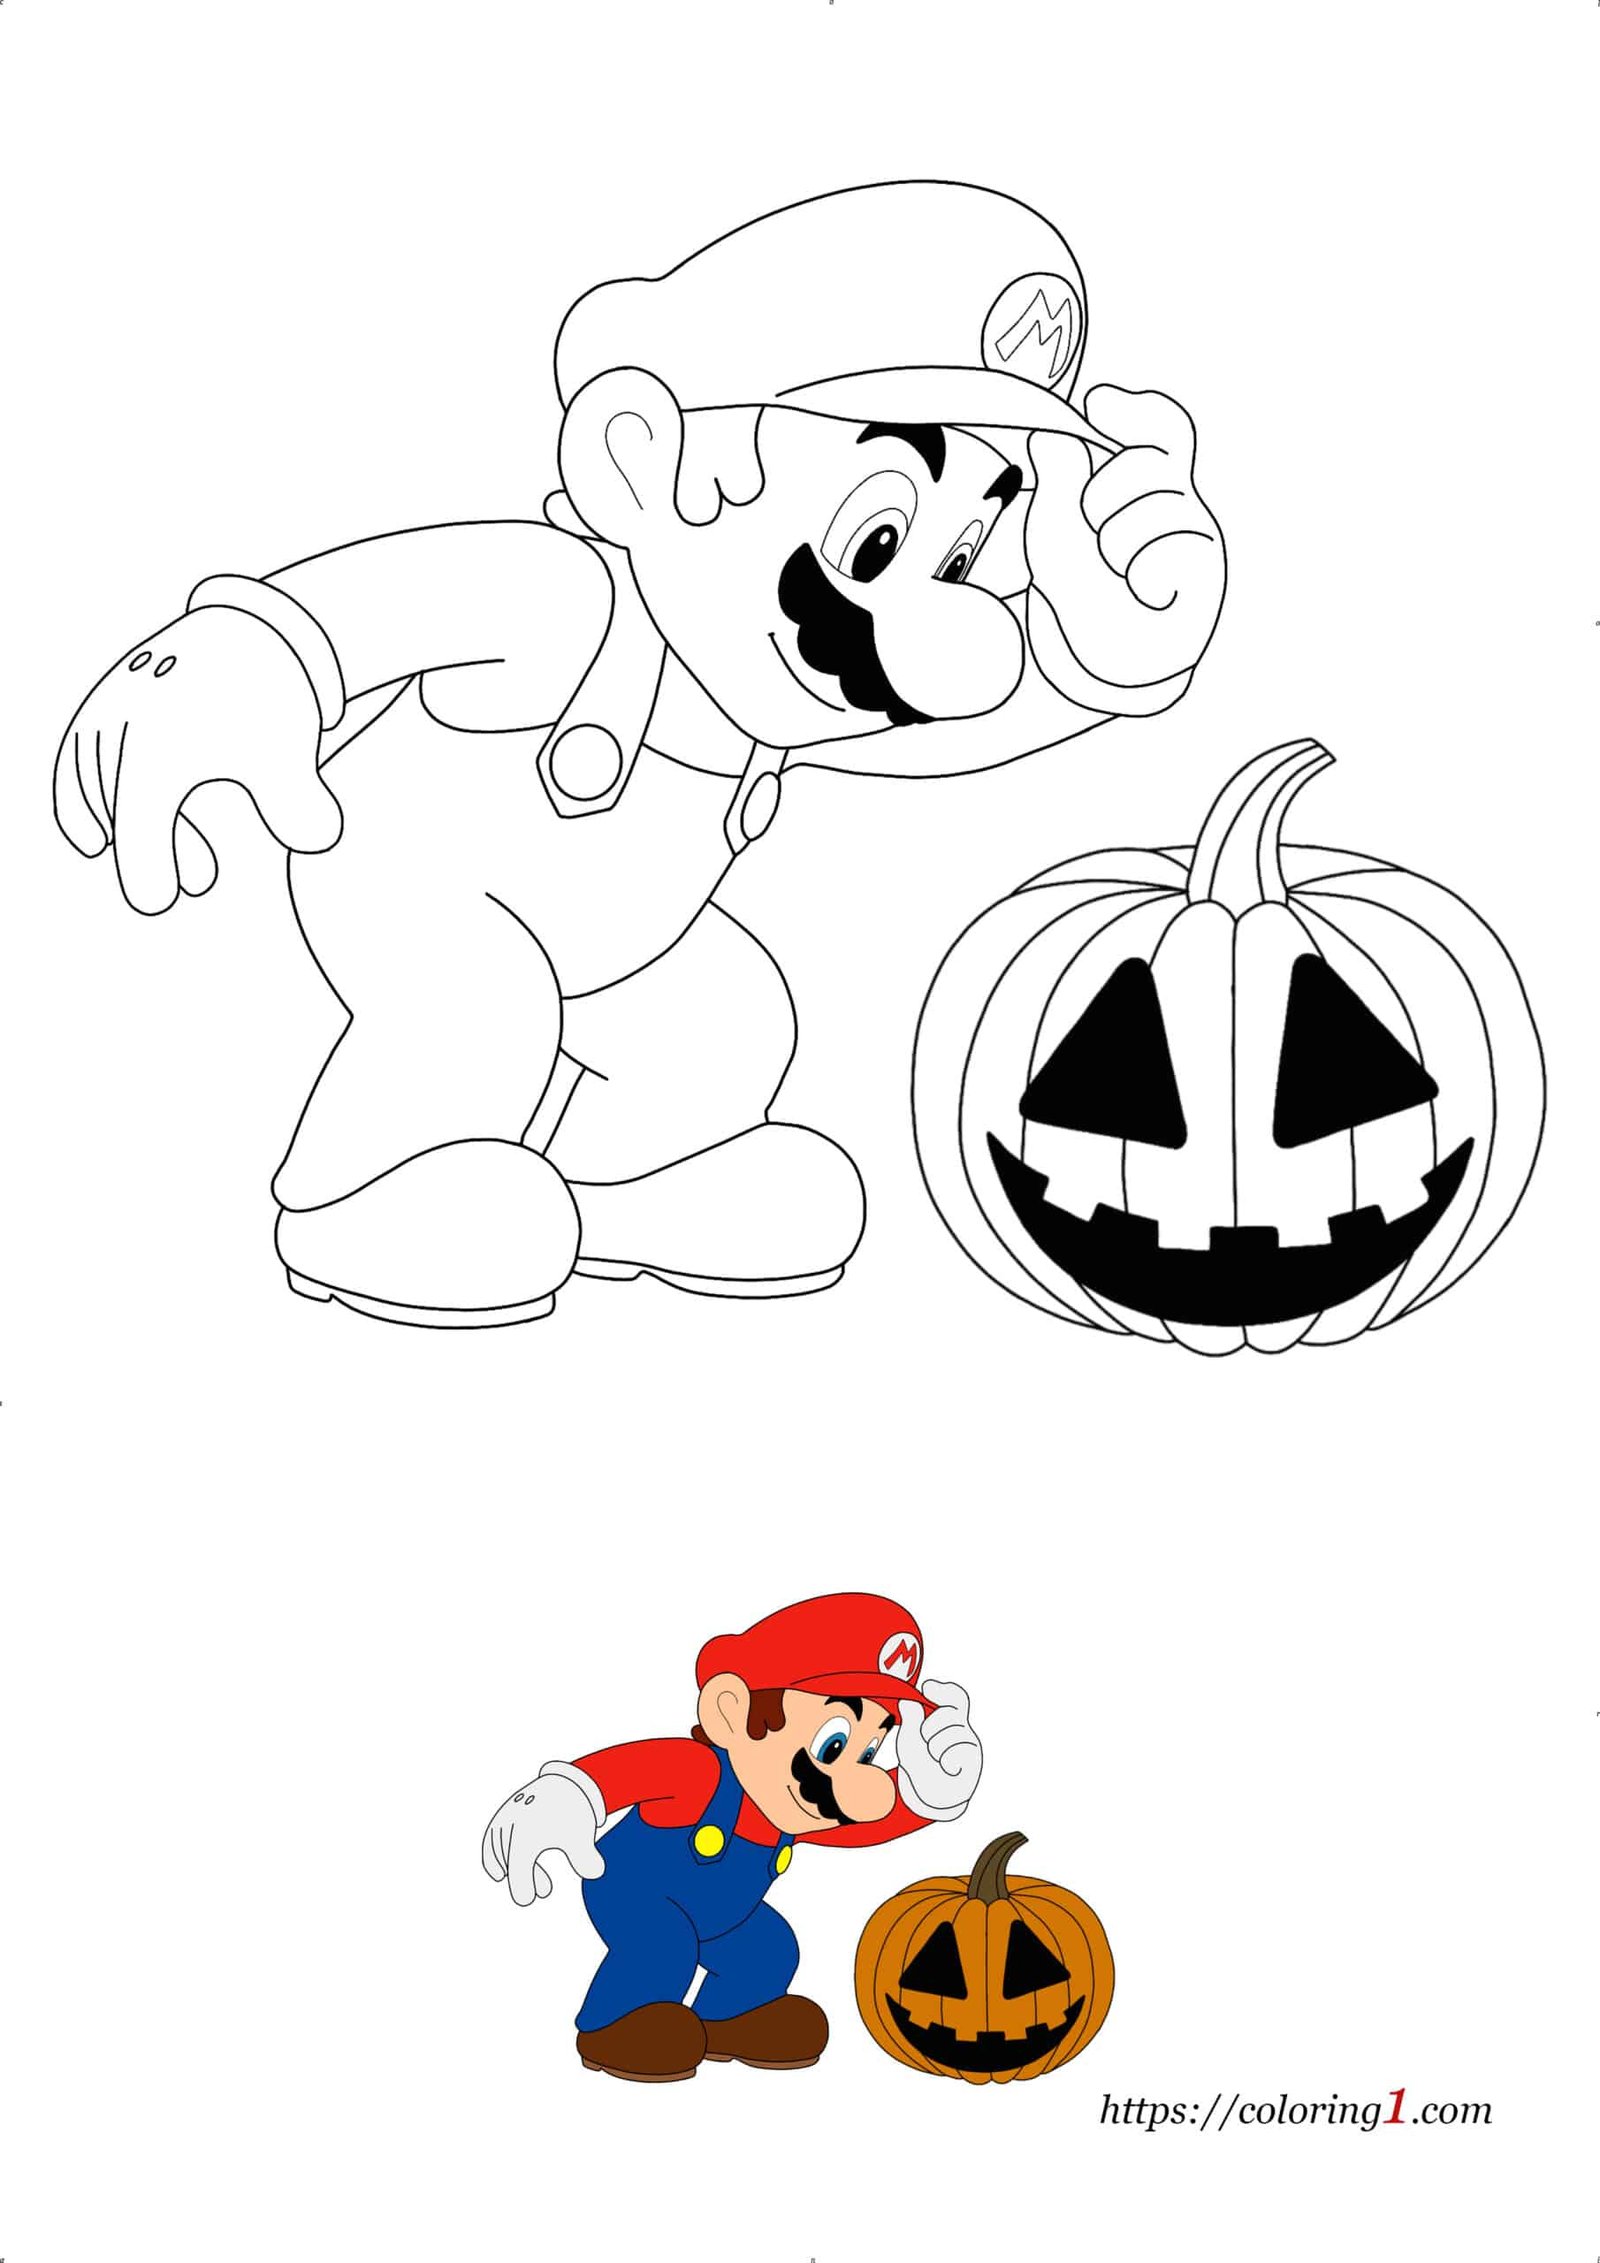 Mario halloween coloring pages